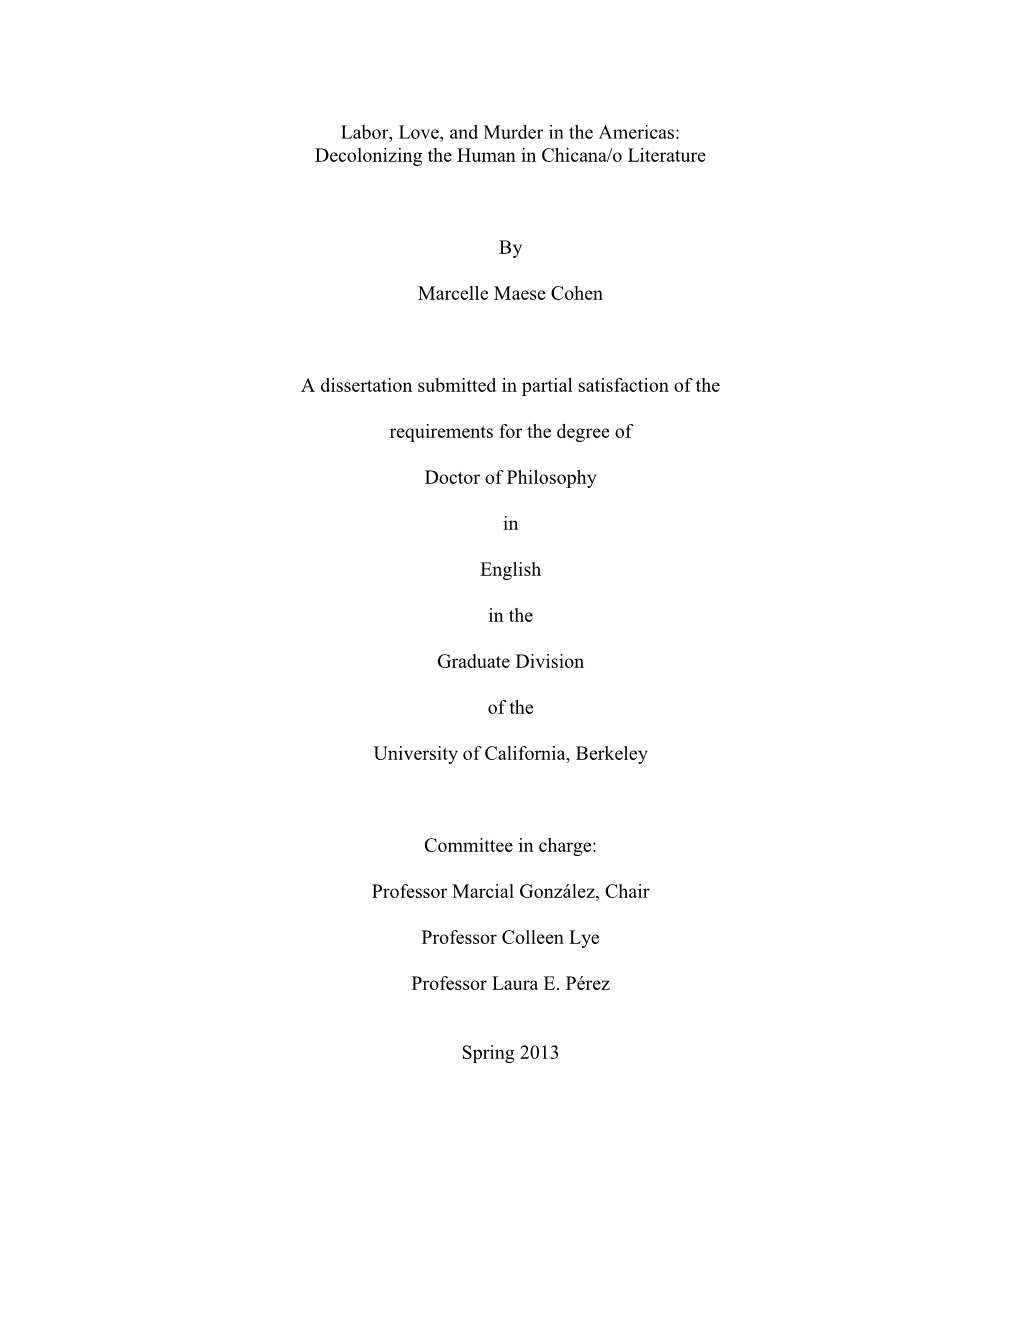 Labor, Love, and Murder in the Americas: Decolonizing the Human in Chicana/O Literature by Marcelle Maese Cohen a Dissertation S